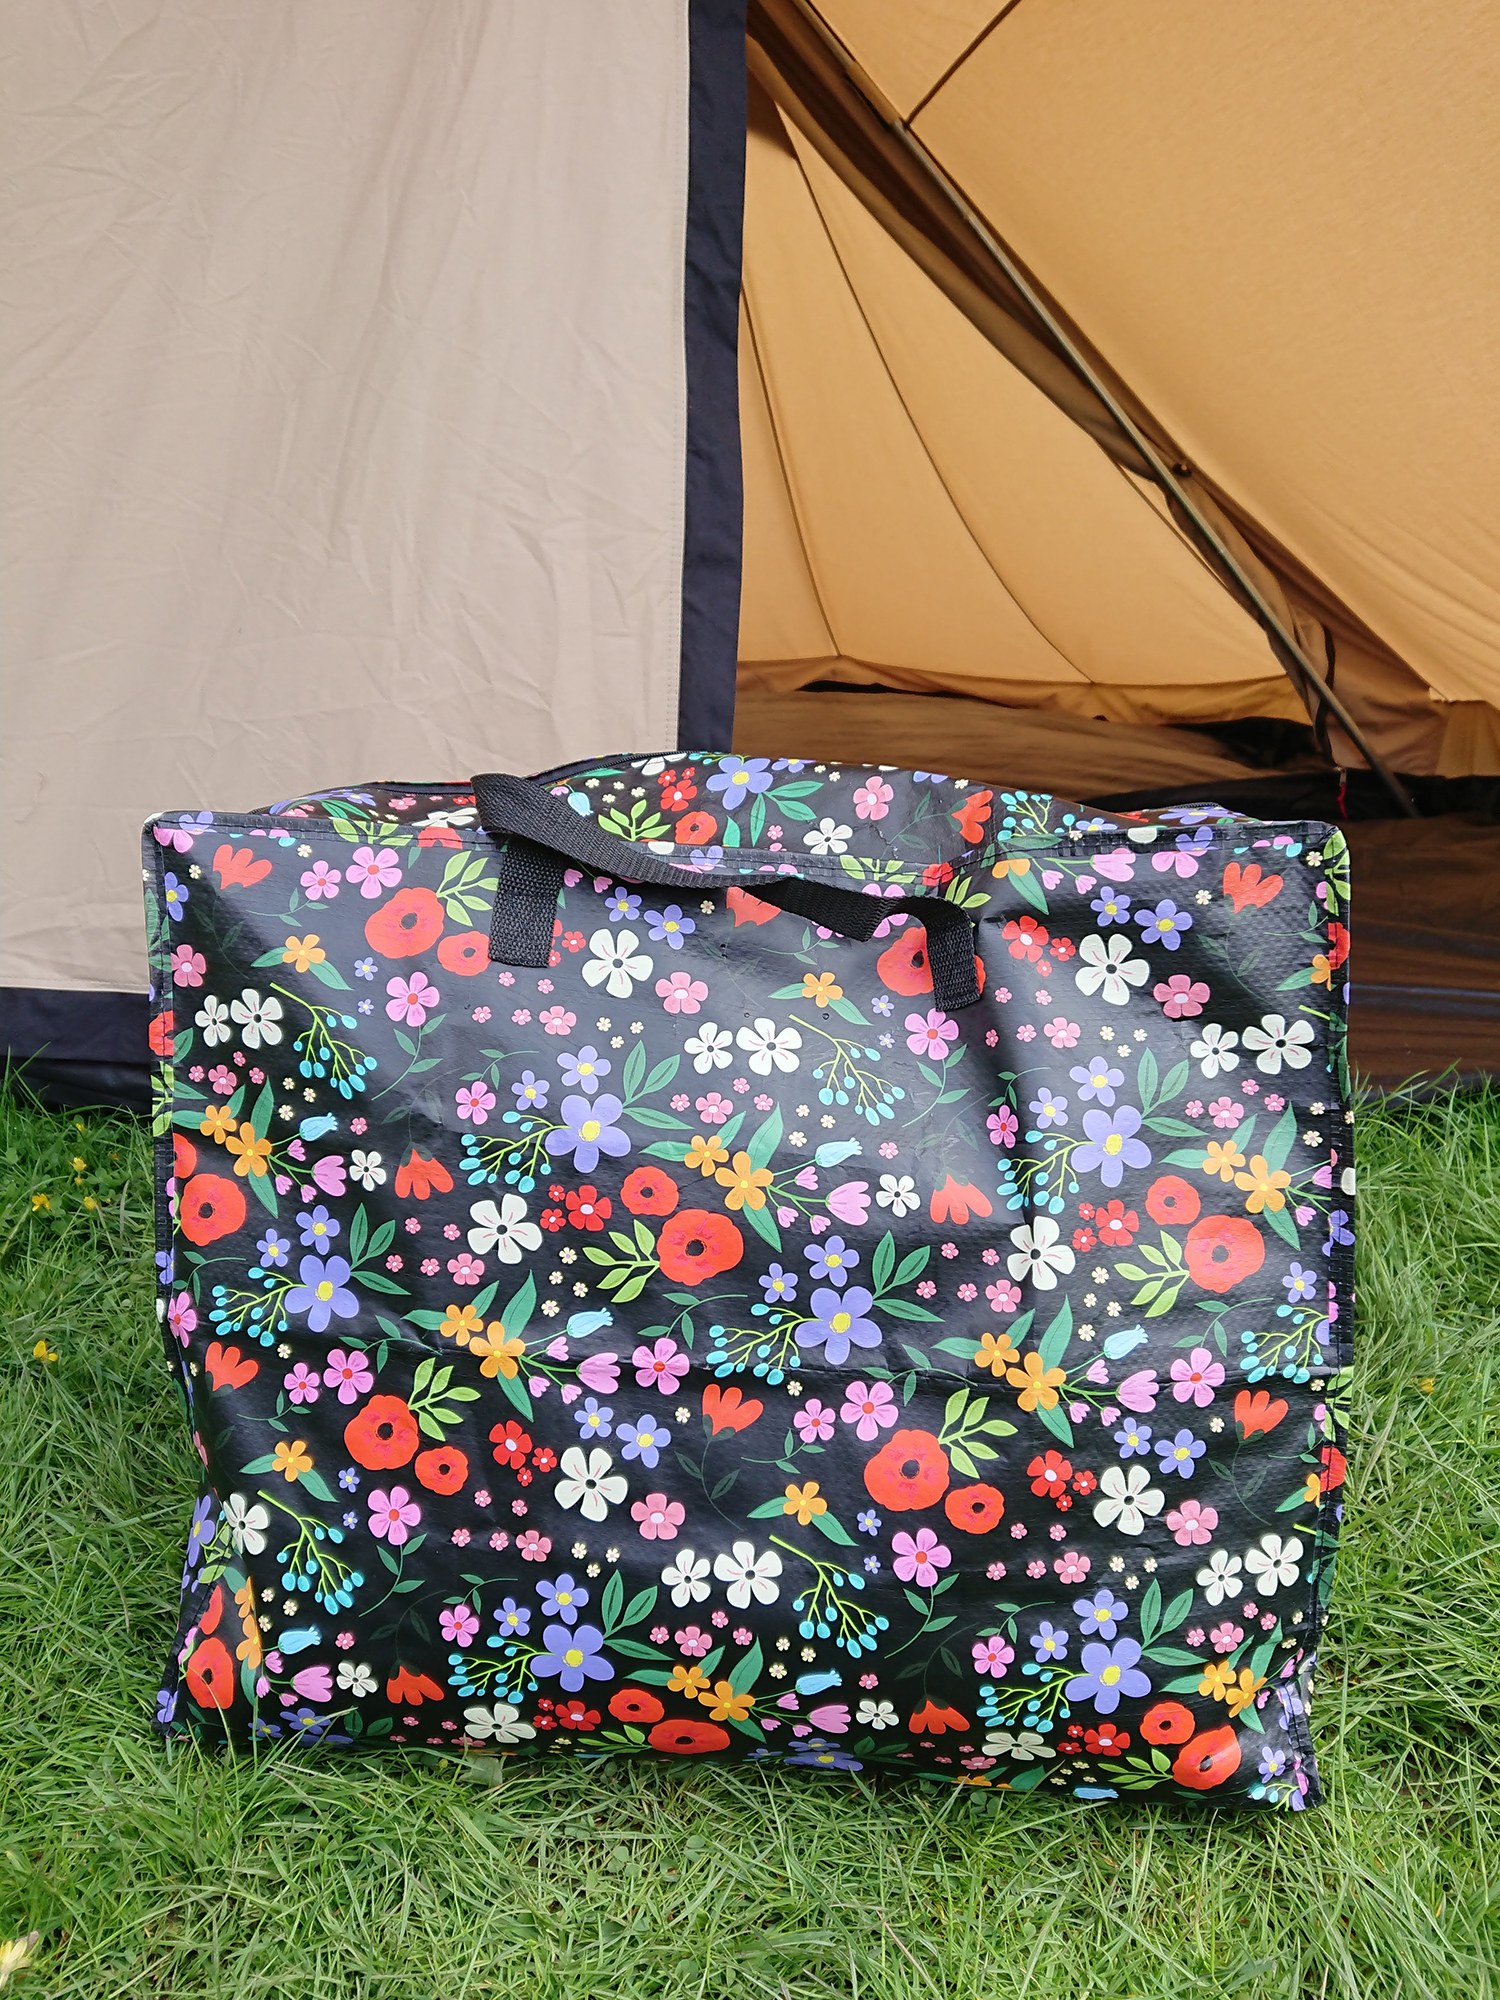 These jumbo recycled storage bags are perfect for camping!